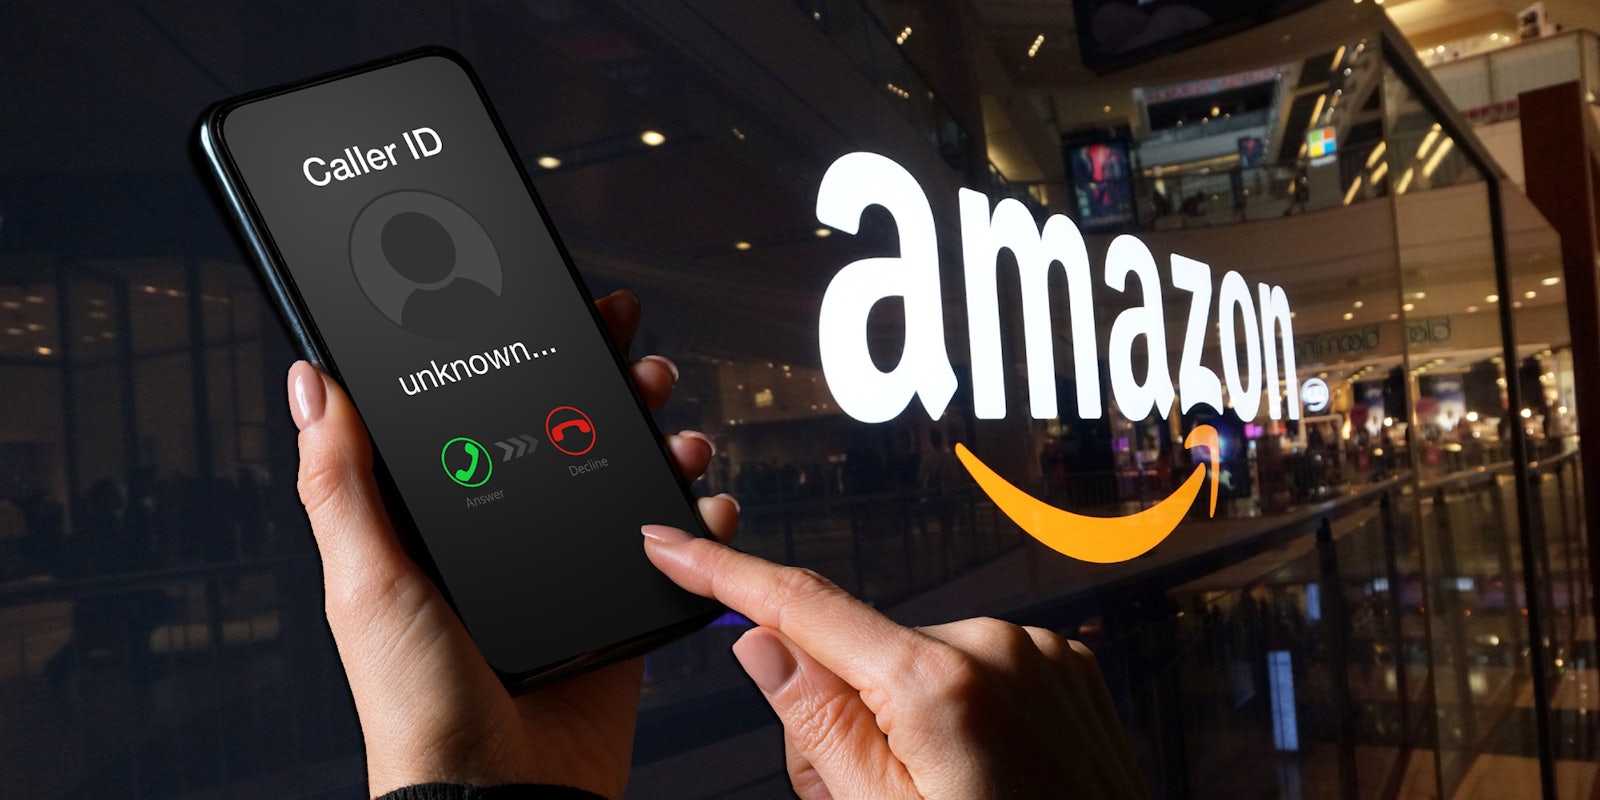 An Amazon logo in the background next to someone getting a scam call.